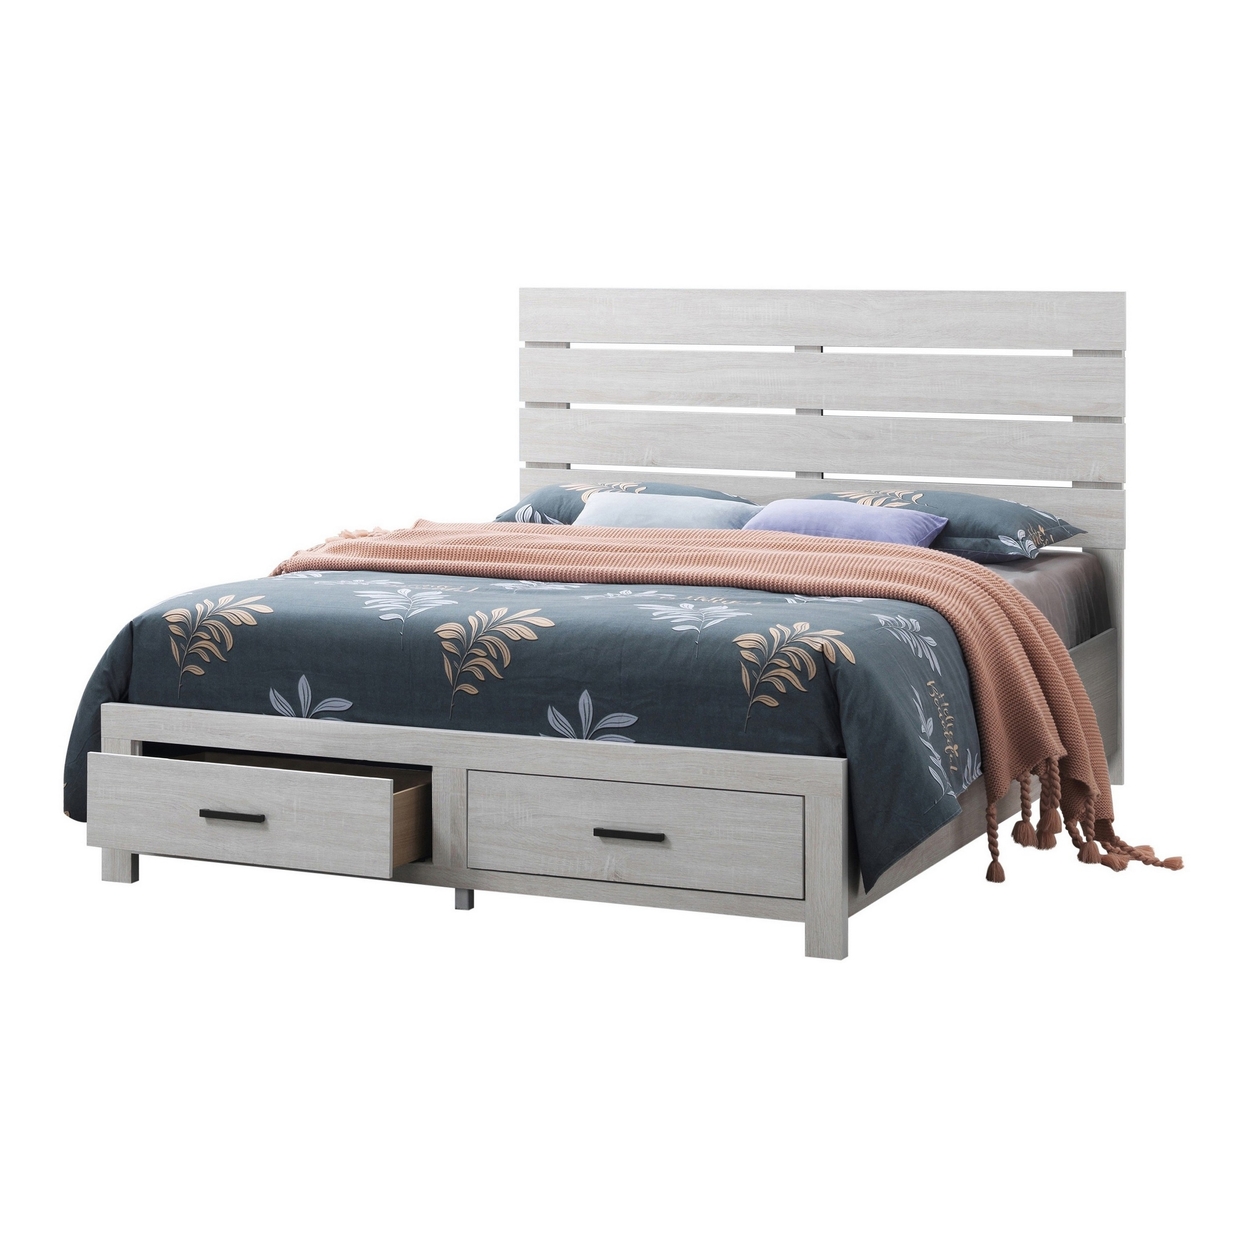 Ach Wood Queen Storage Bed With 2 Drawers, Plank Style Headboard, White- Saltoro Sherpi